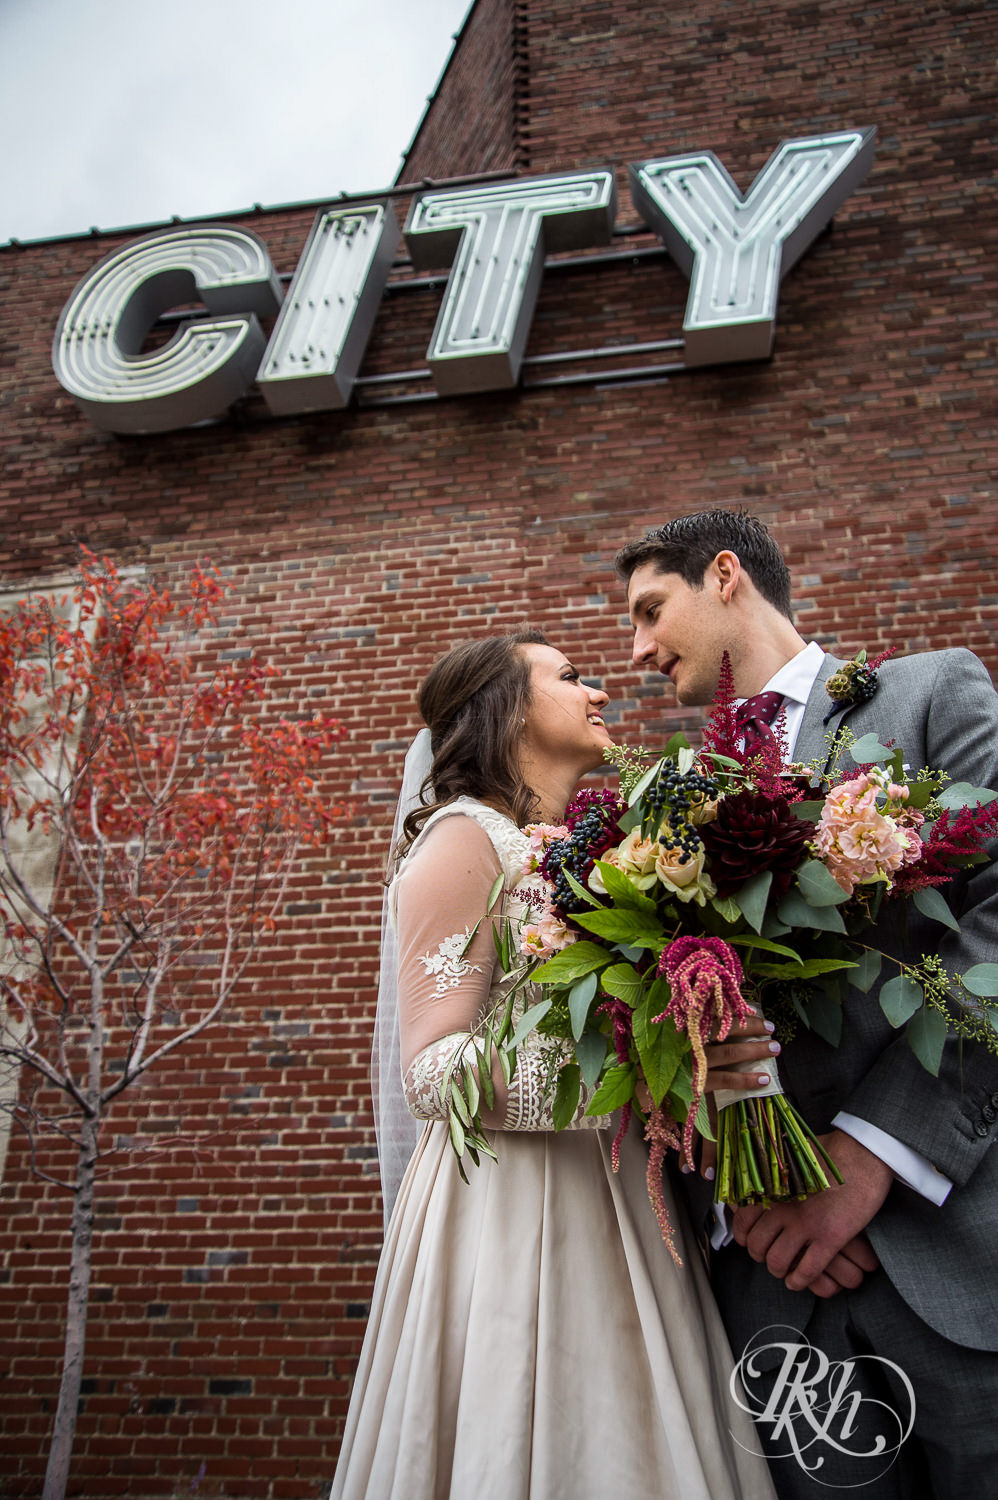 Bride and groom kiss under a City sign on a rainy wedding day in Minneapolis, Minnesota.